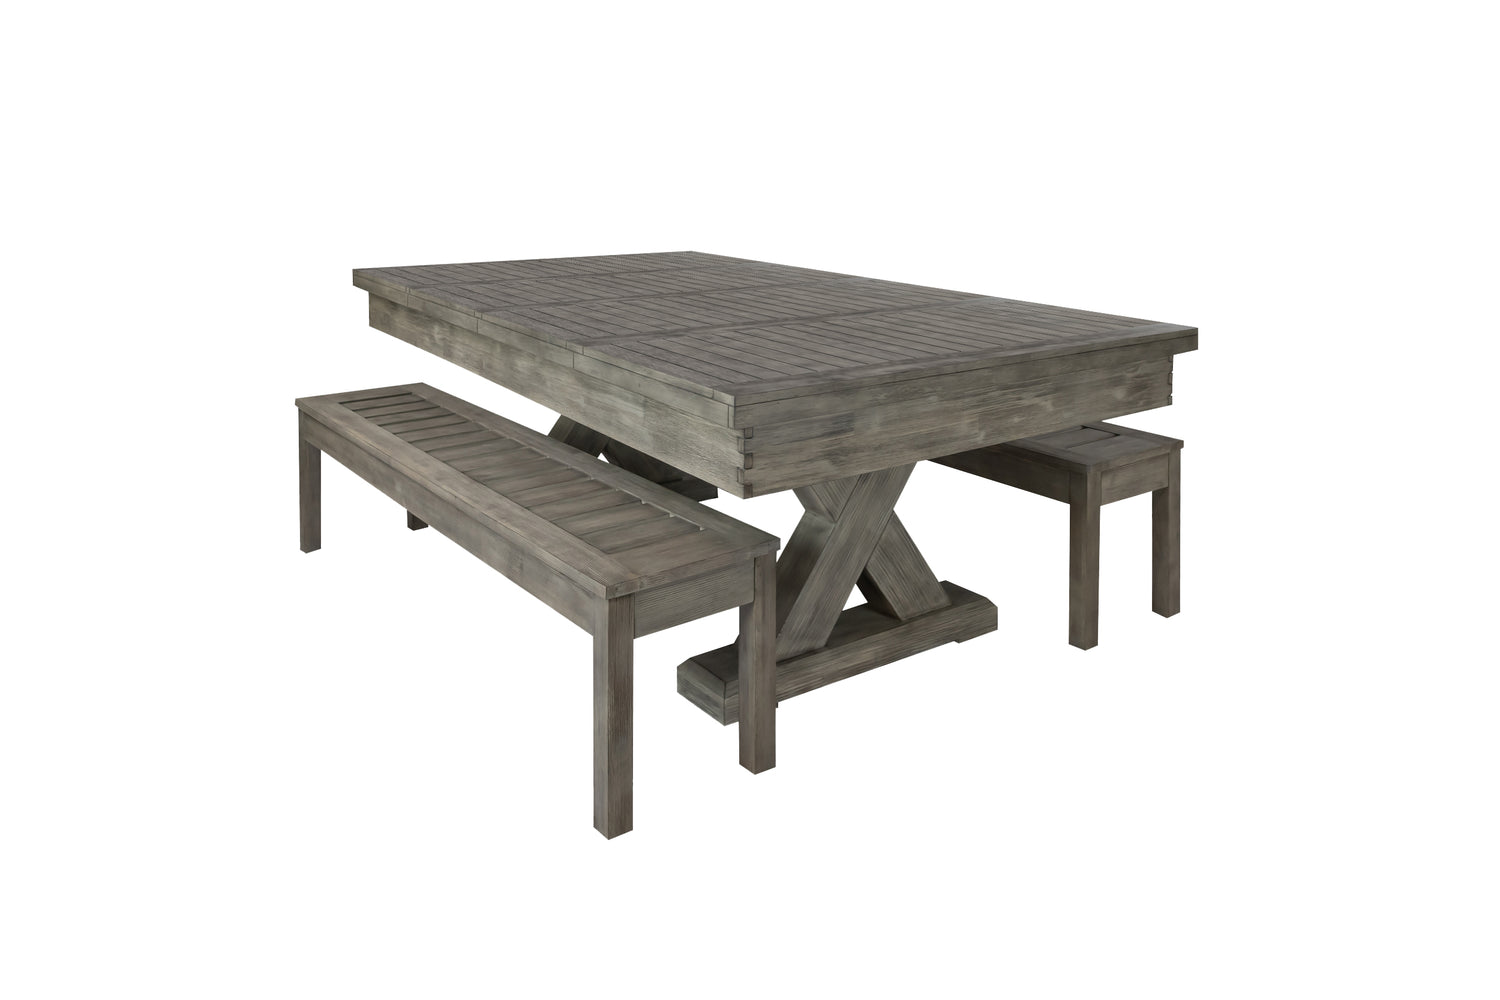 Legacy Billiards 8 Ft Outdoor Dining Top in Ash Grey Finish Dining Collection with Seating